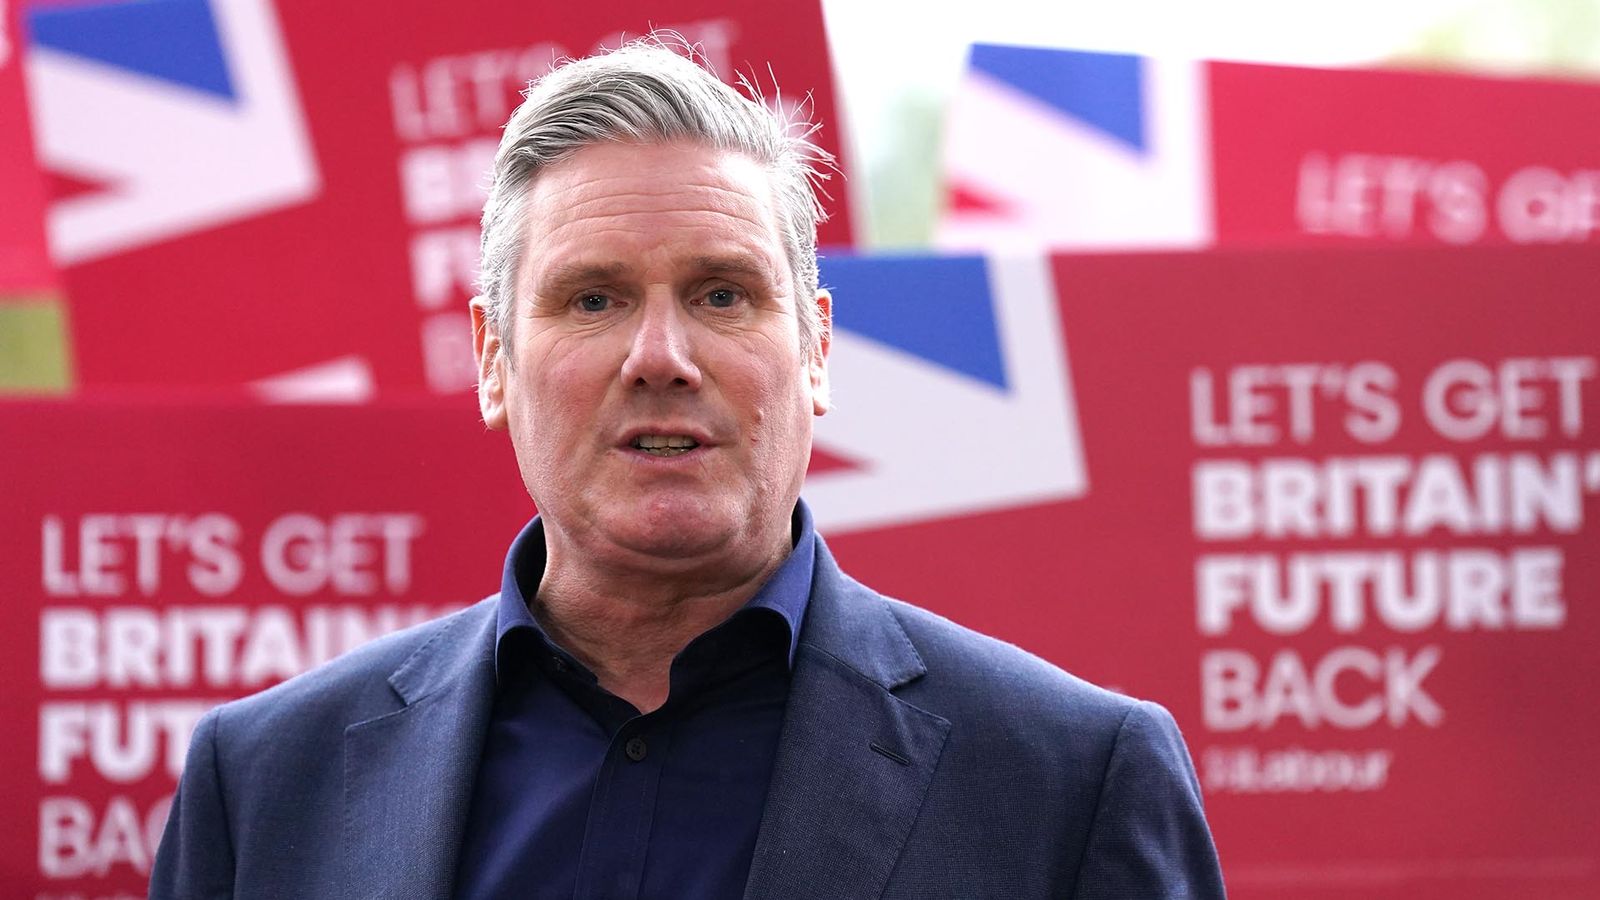 Sir Keir Starmer 'renewed' by double by-election win - but 'mountain to climb' before national poll